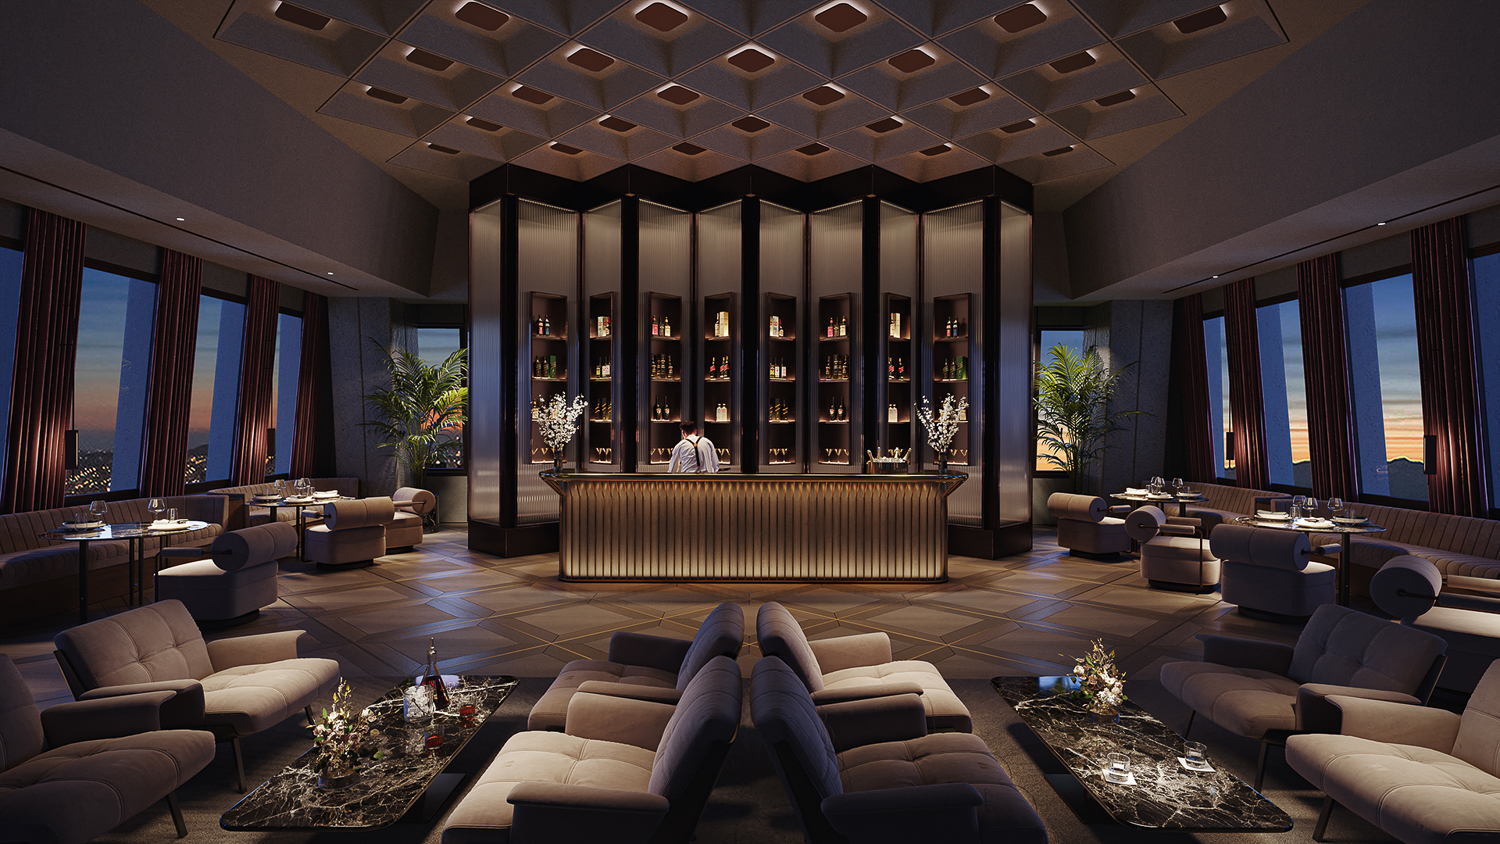 Transamerica Pyramid 48th floor tenants bar and lounge, rendering by BoyeroVisualizers, design by Foster + Partners